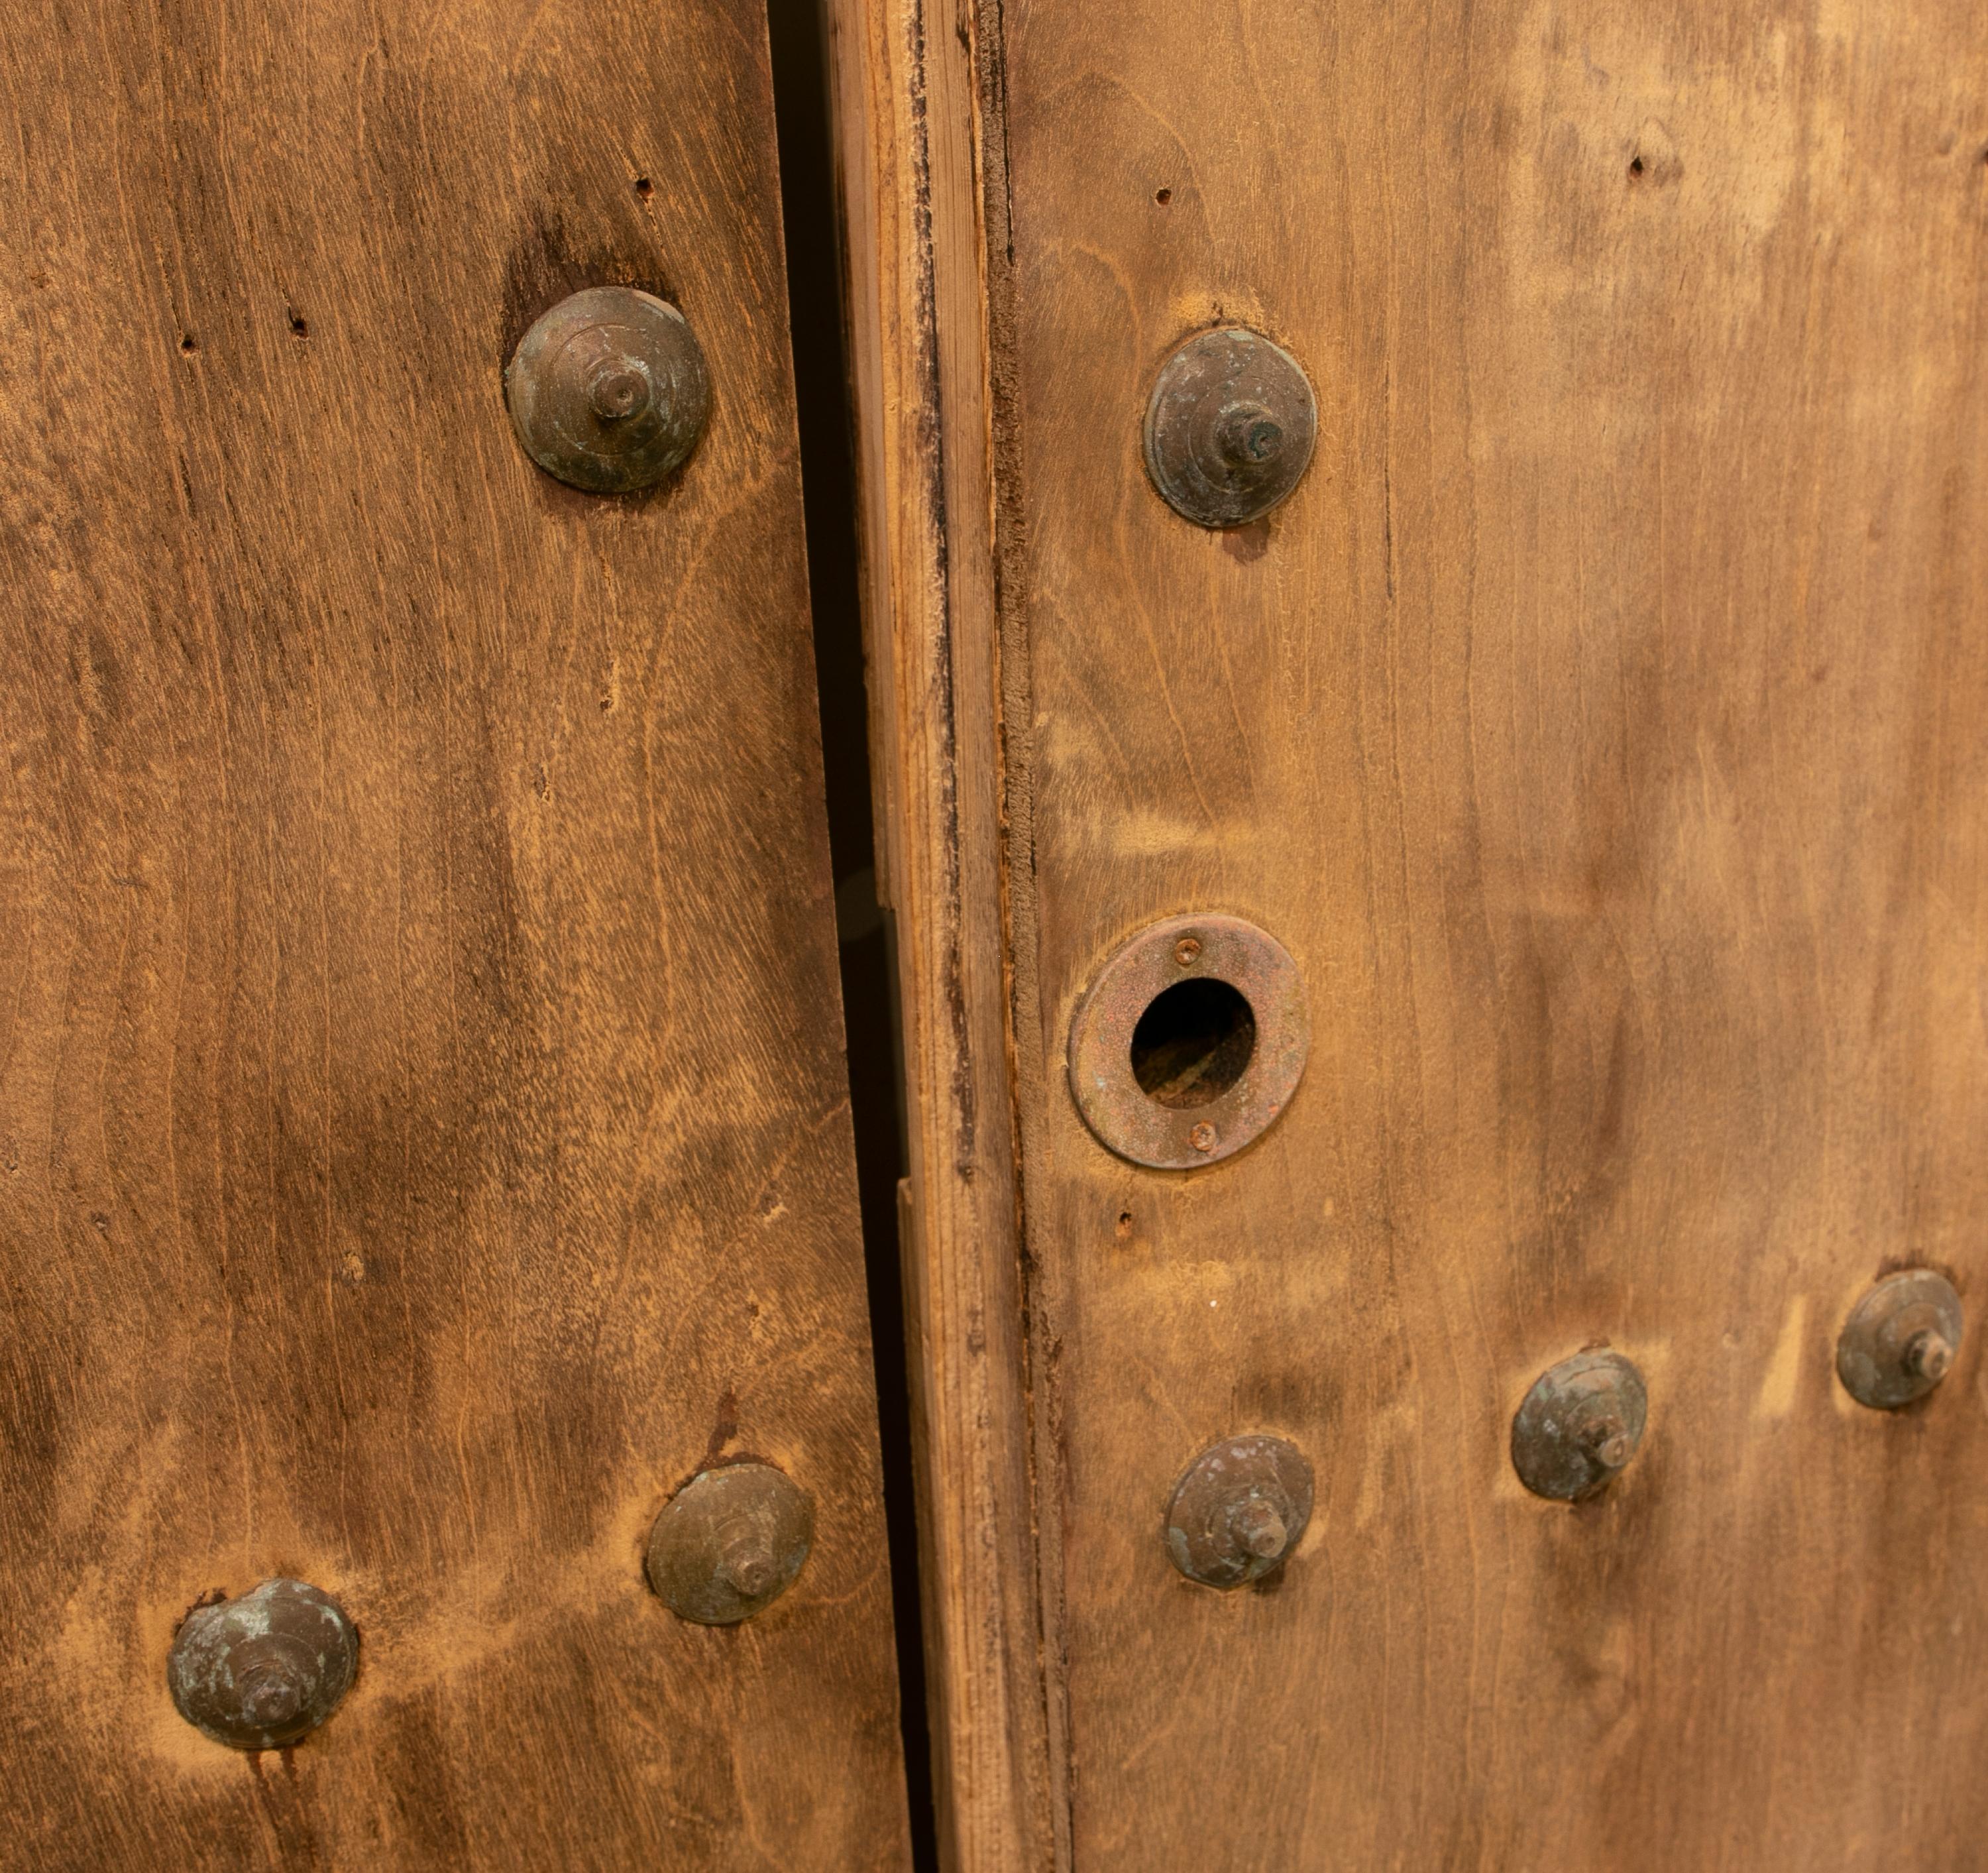 18th century Spanish wooden door with bronze Nail decoration

Dimensions are for each door.
    